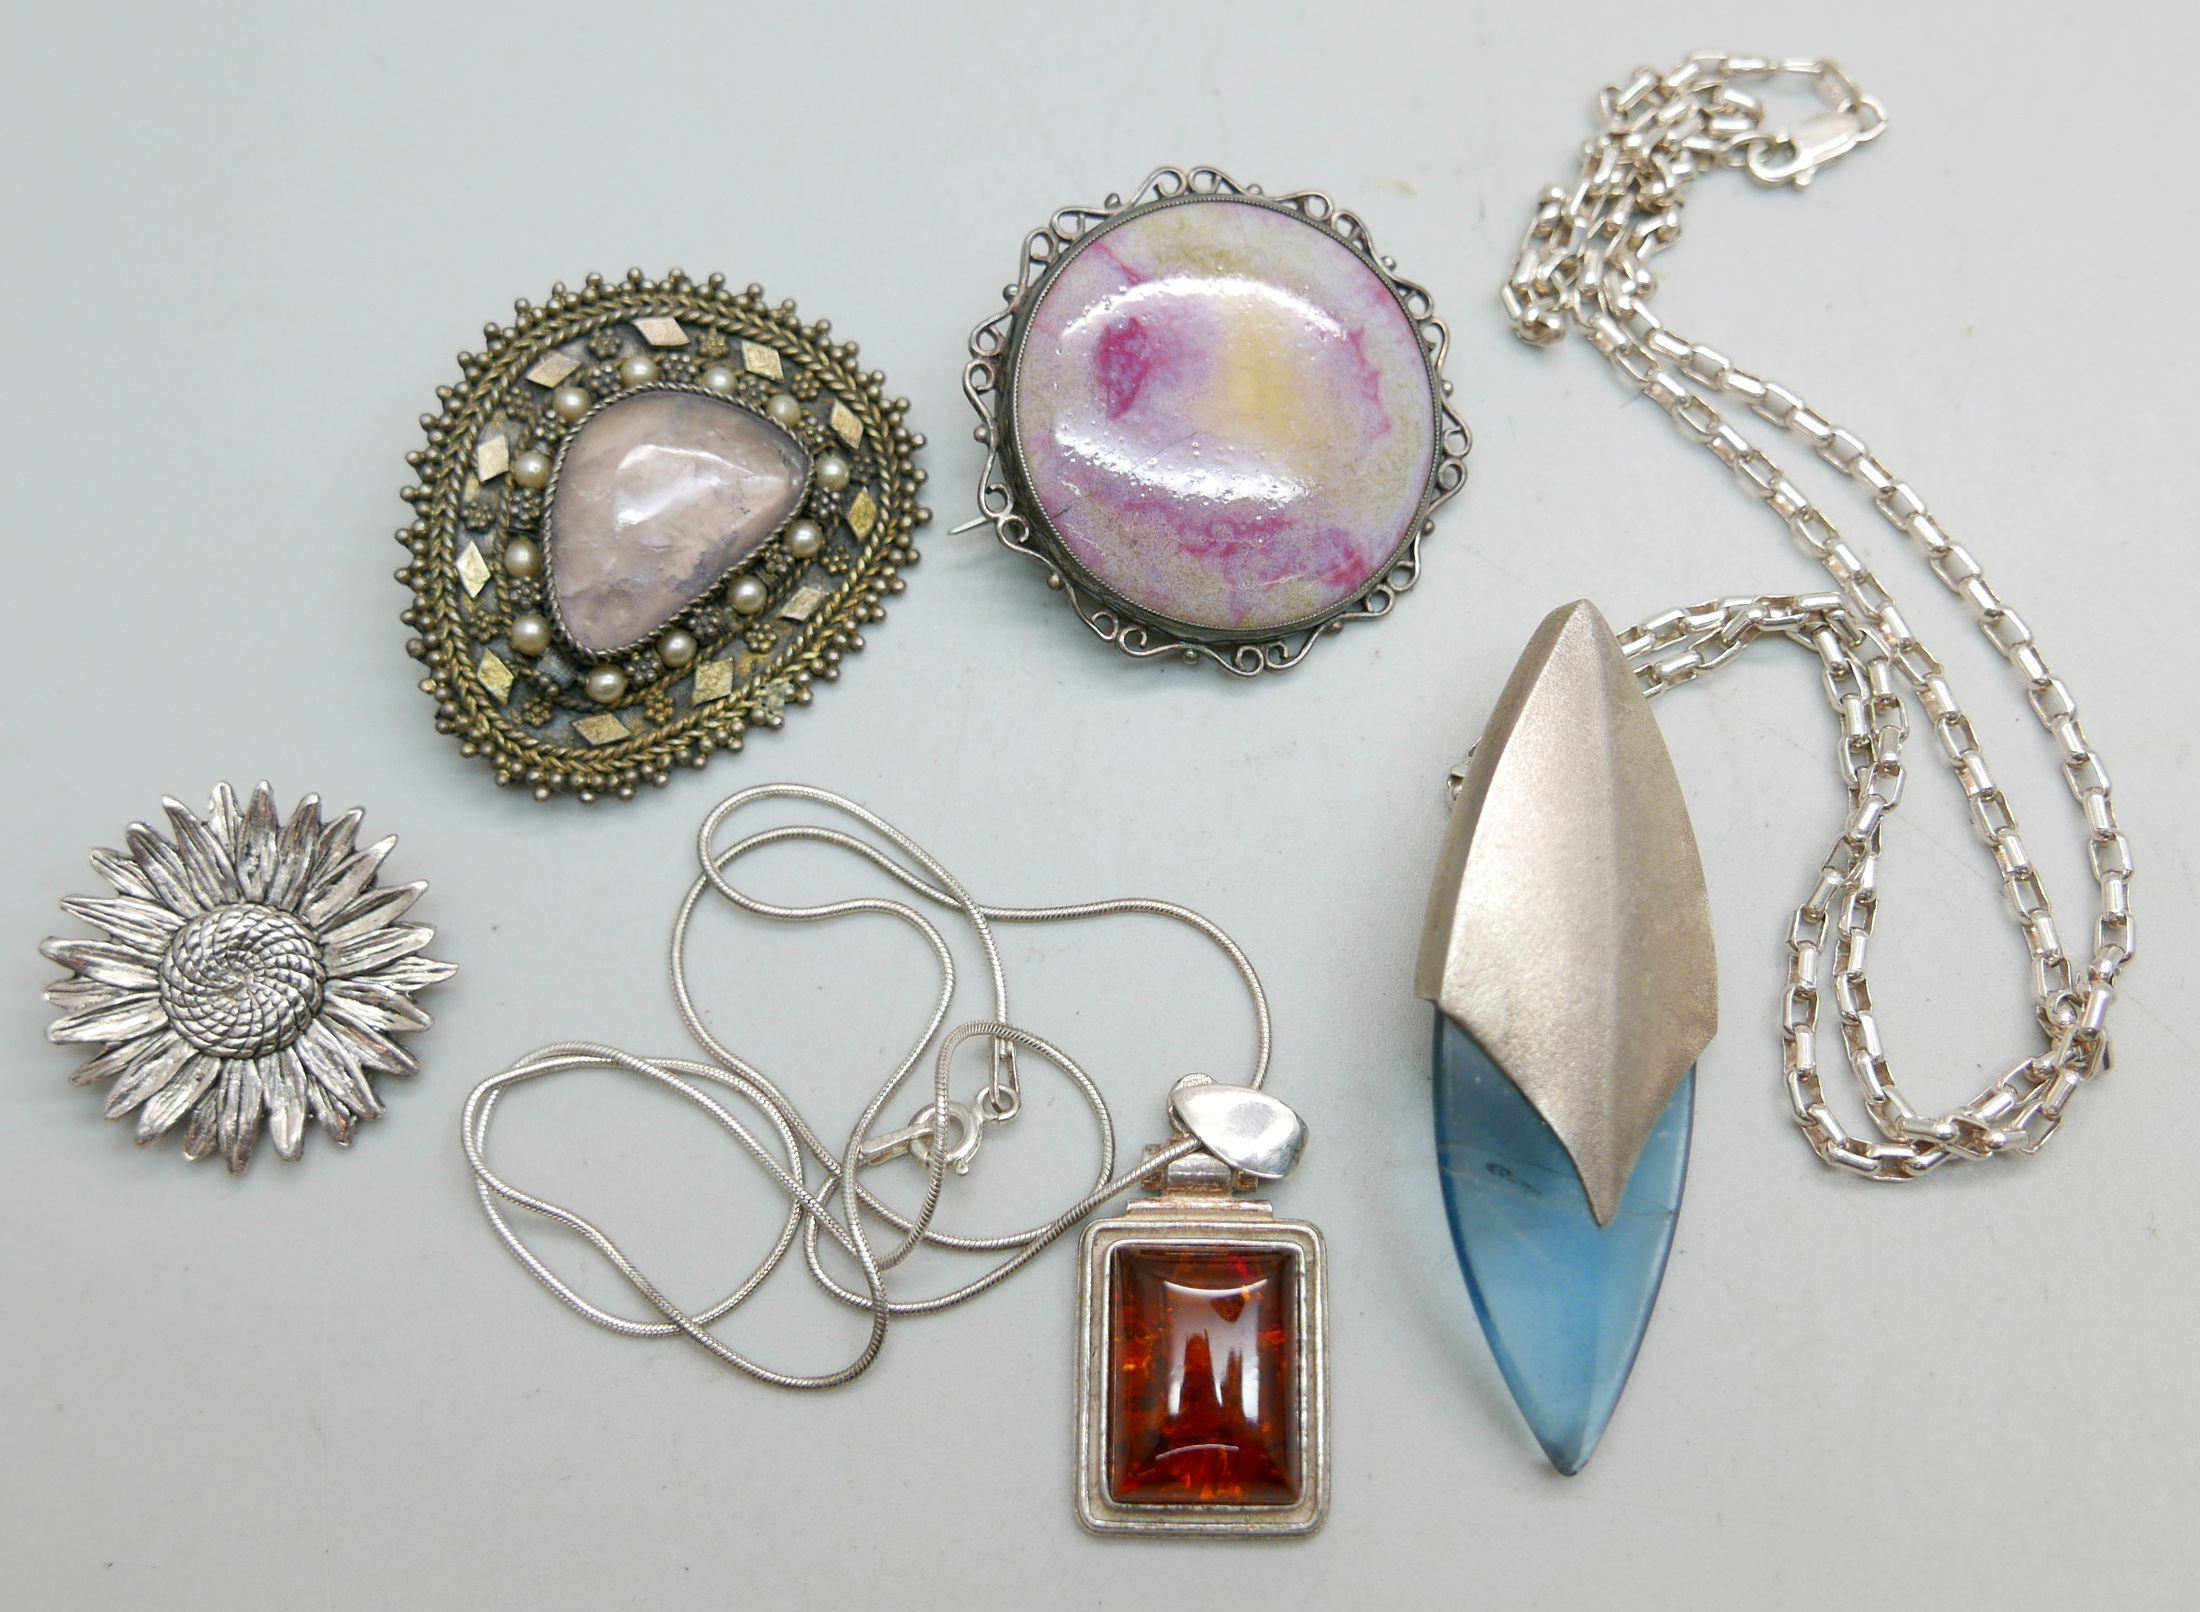 Three brooches and two pendants on silver chains